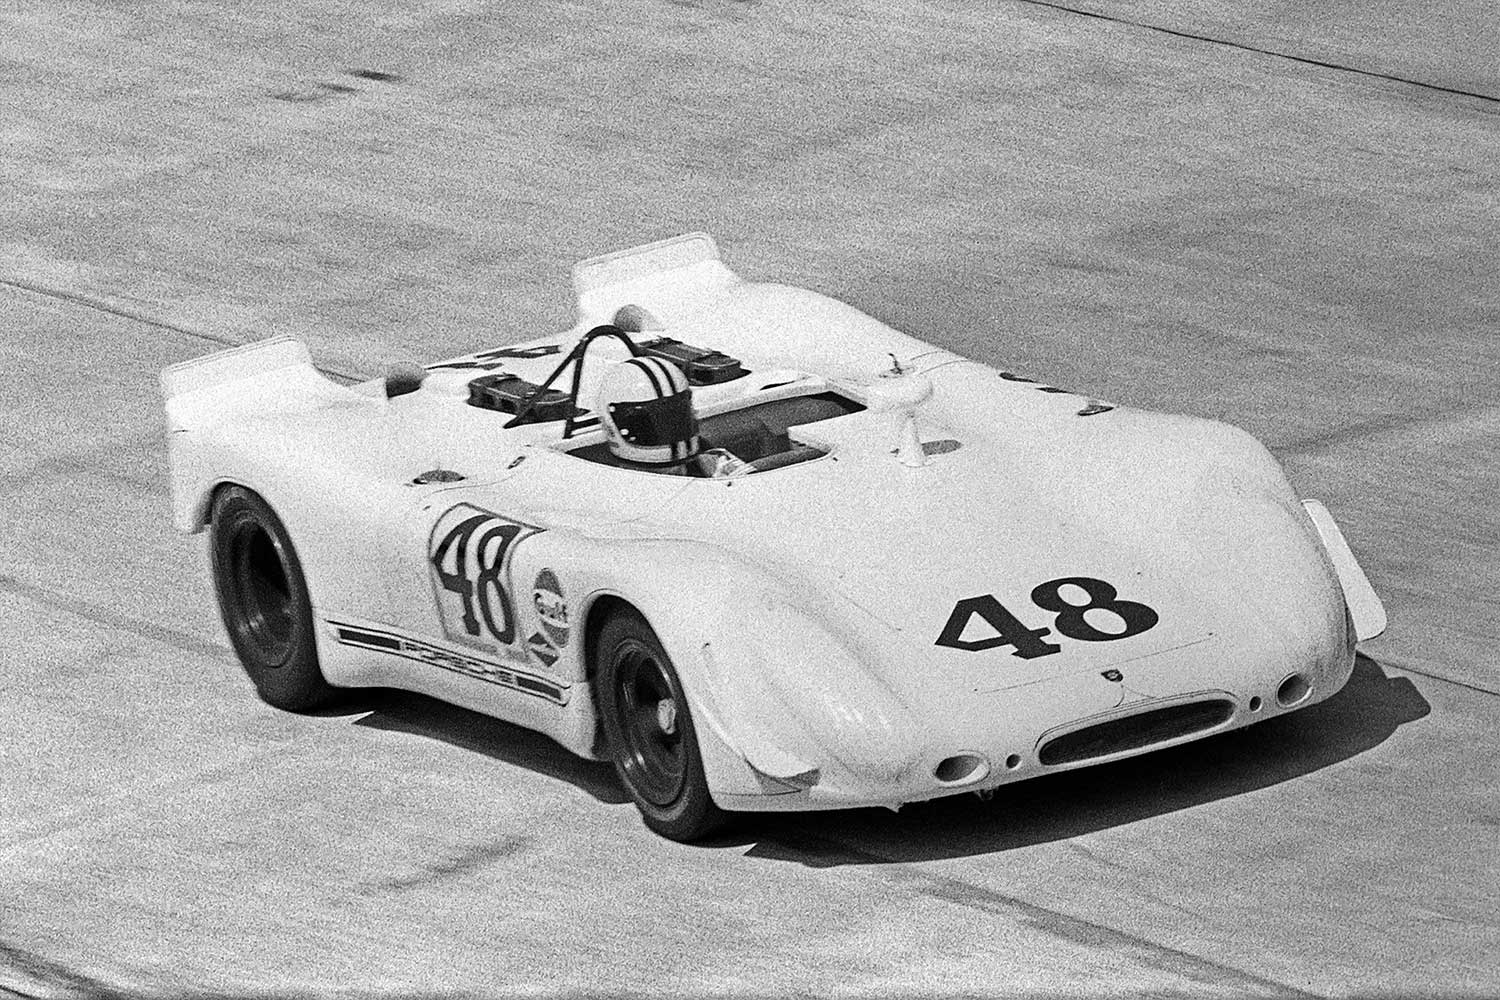 Steve McQueen at the wheel of his Porsche 908/02 during the 1970 12 Hours of Sebring, where he finished second overall with teammate Peter Revson. (Photo by Bernard Cahier/Getty Images)